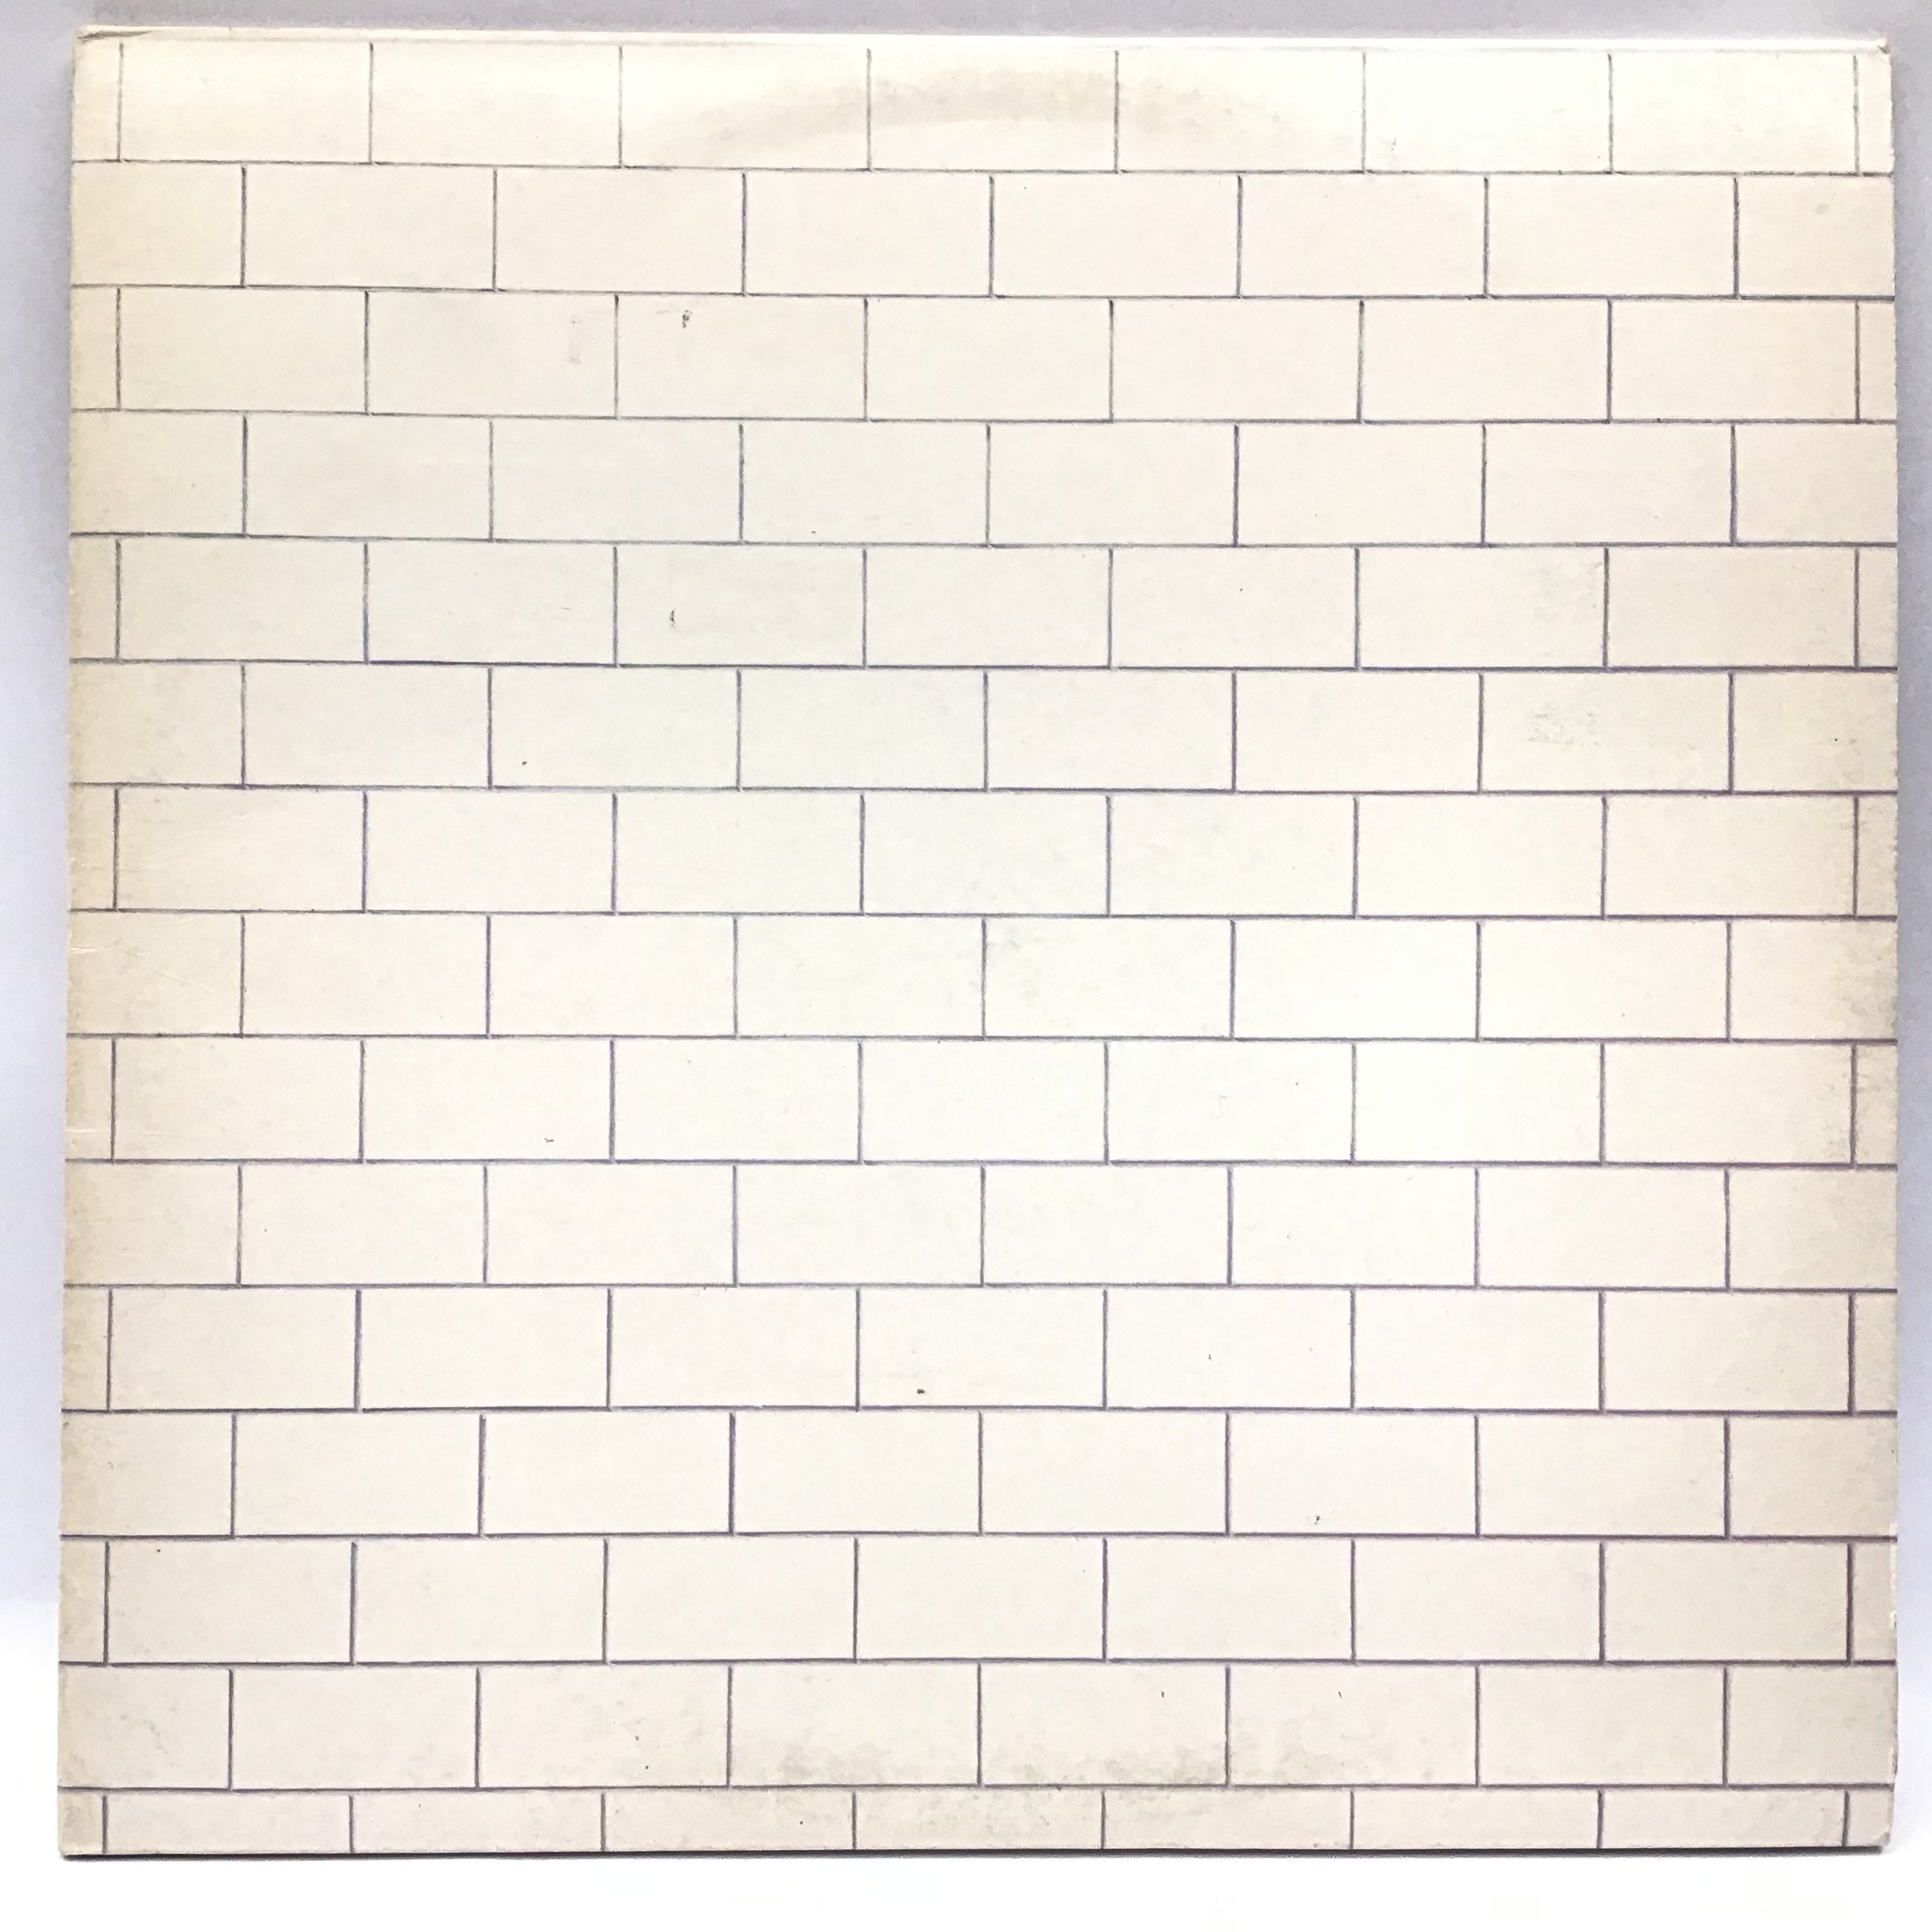 PINK FLOYD 'THE WALL' UK STEREO VINYL DOUBLE ALBUM. Great record here on Harvest SHDW411 released in